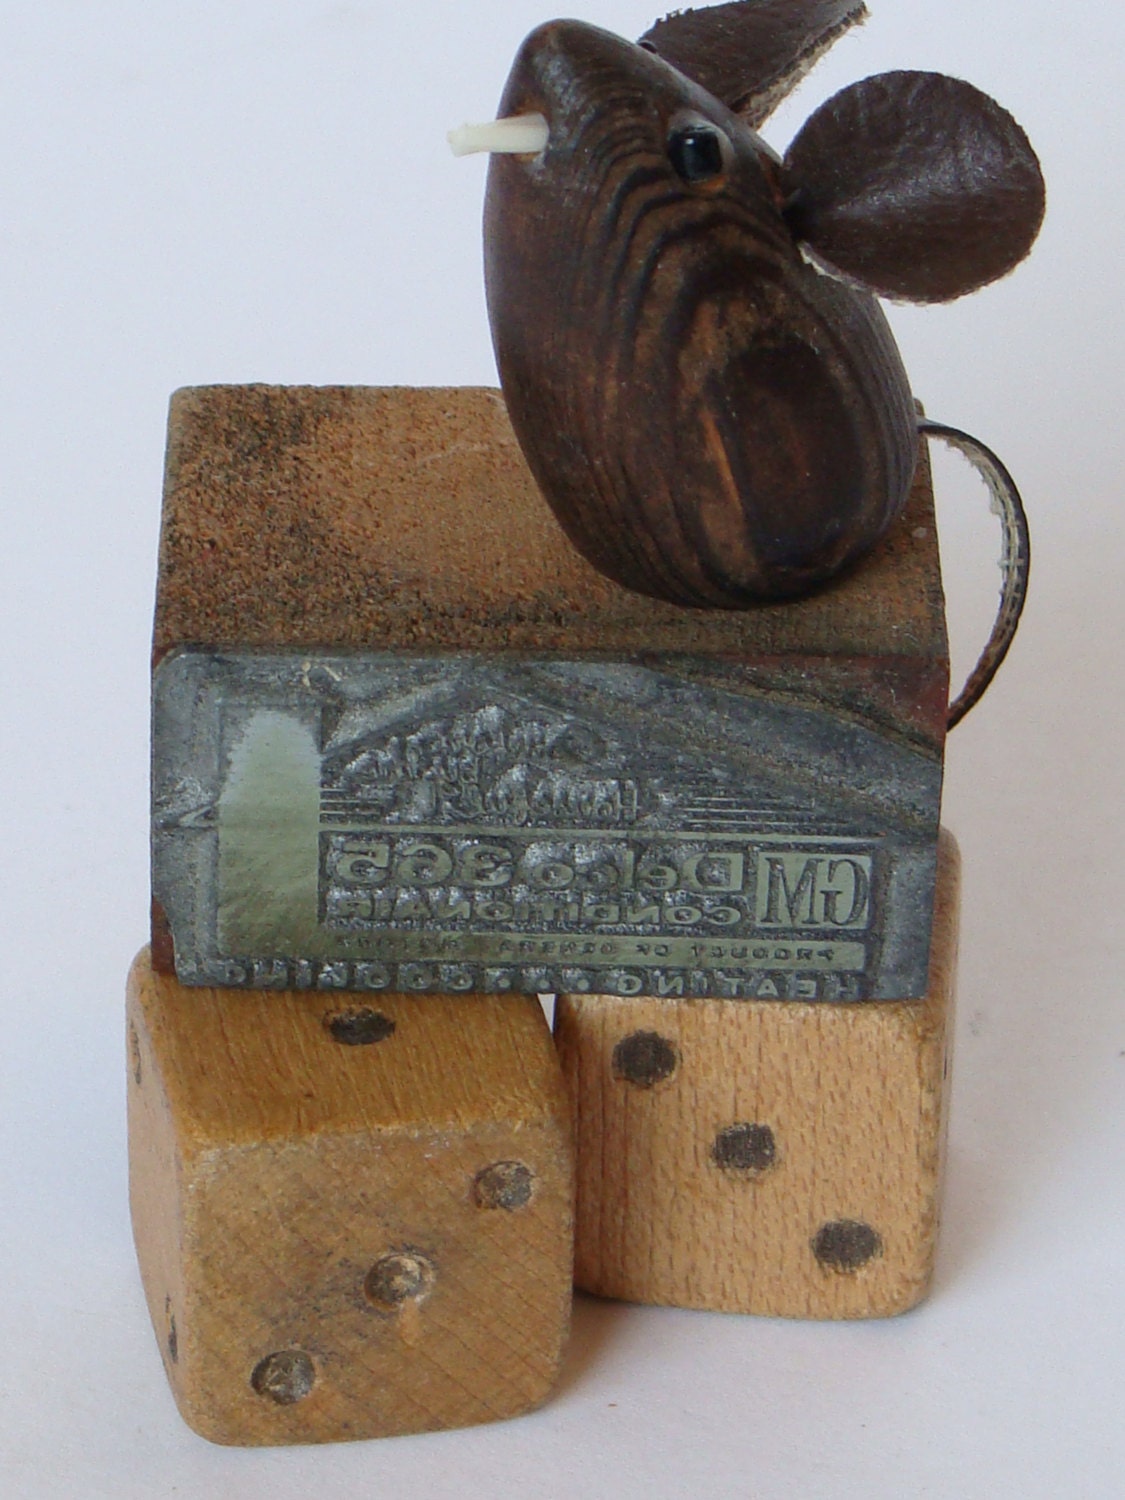 Dice Mouse and Printer's Block - Vintage Miniature Wooden Items - Printer's Box Collectibles - susiewecker